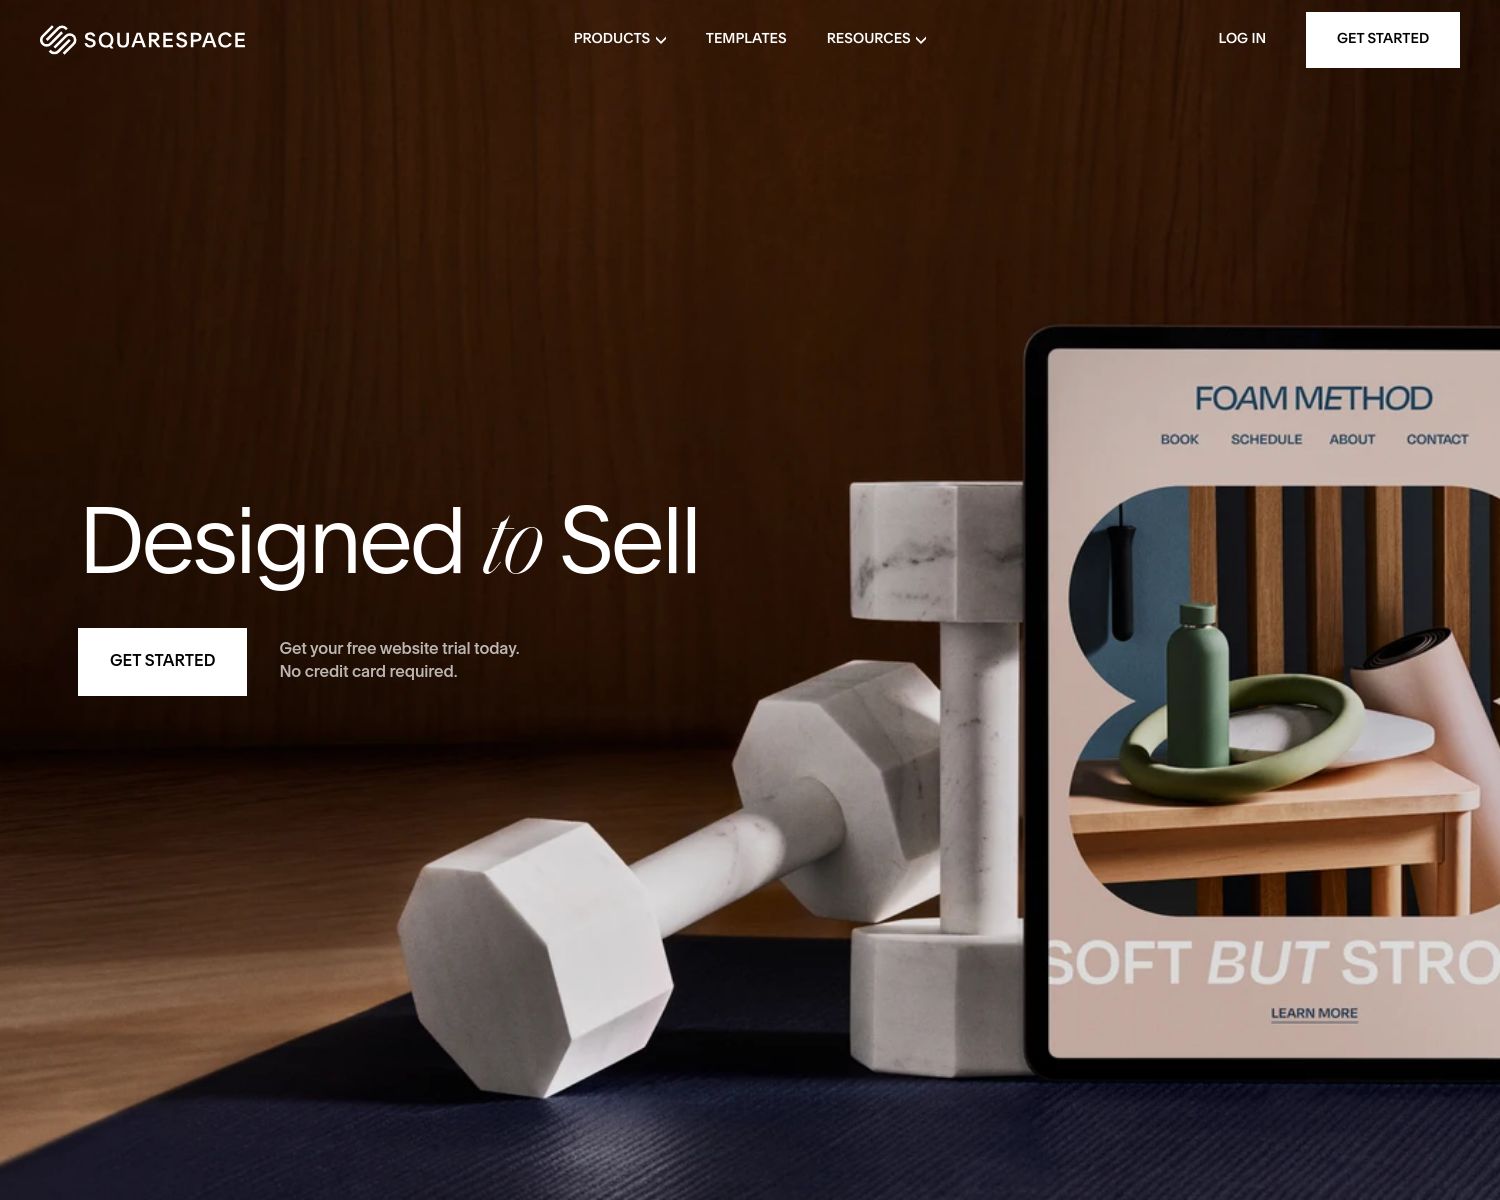 The Squarespace home page